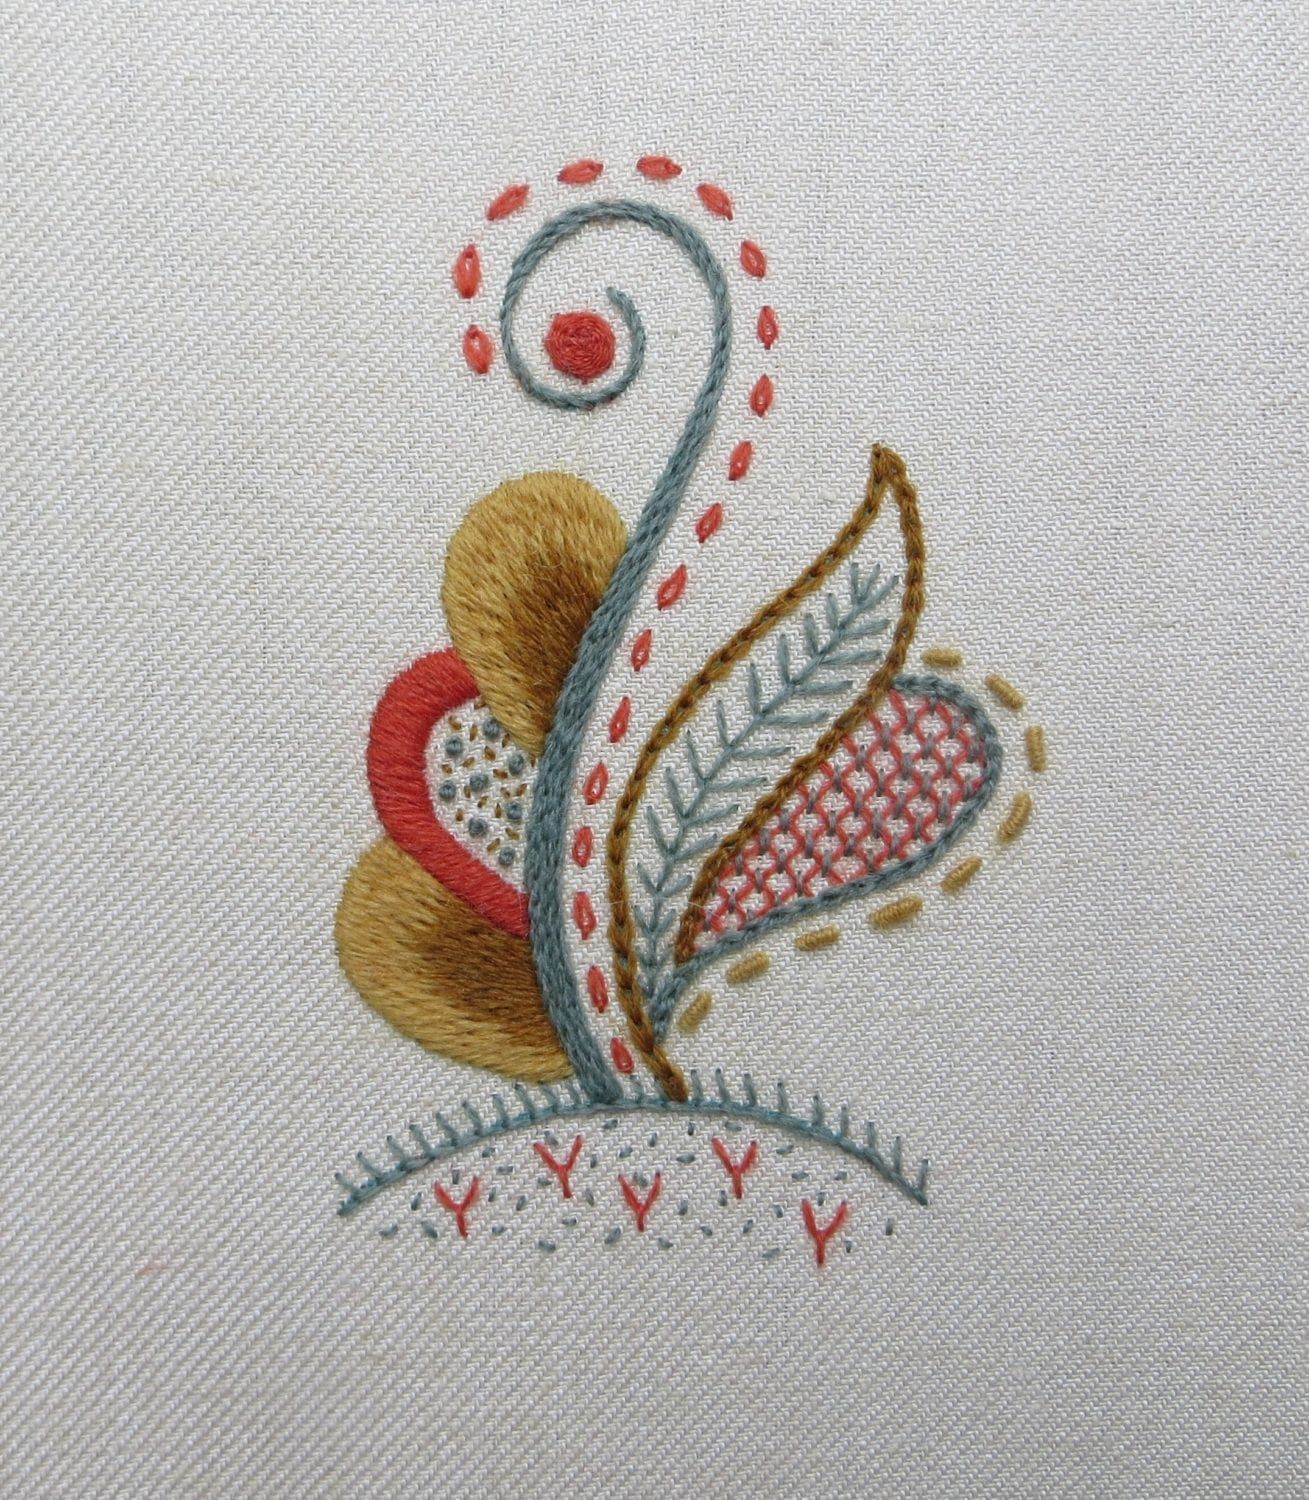 Jacobean Crewel Embroidery Patterns 5053 Intro To Jacobean Crewelwork Fledgling Leaves